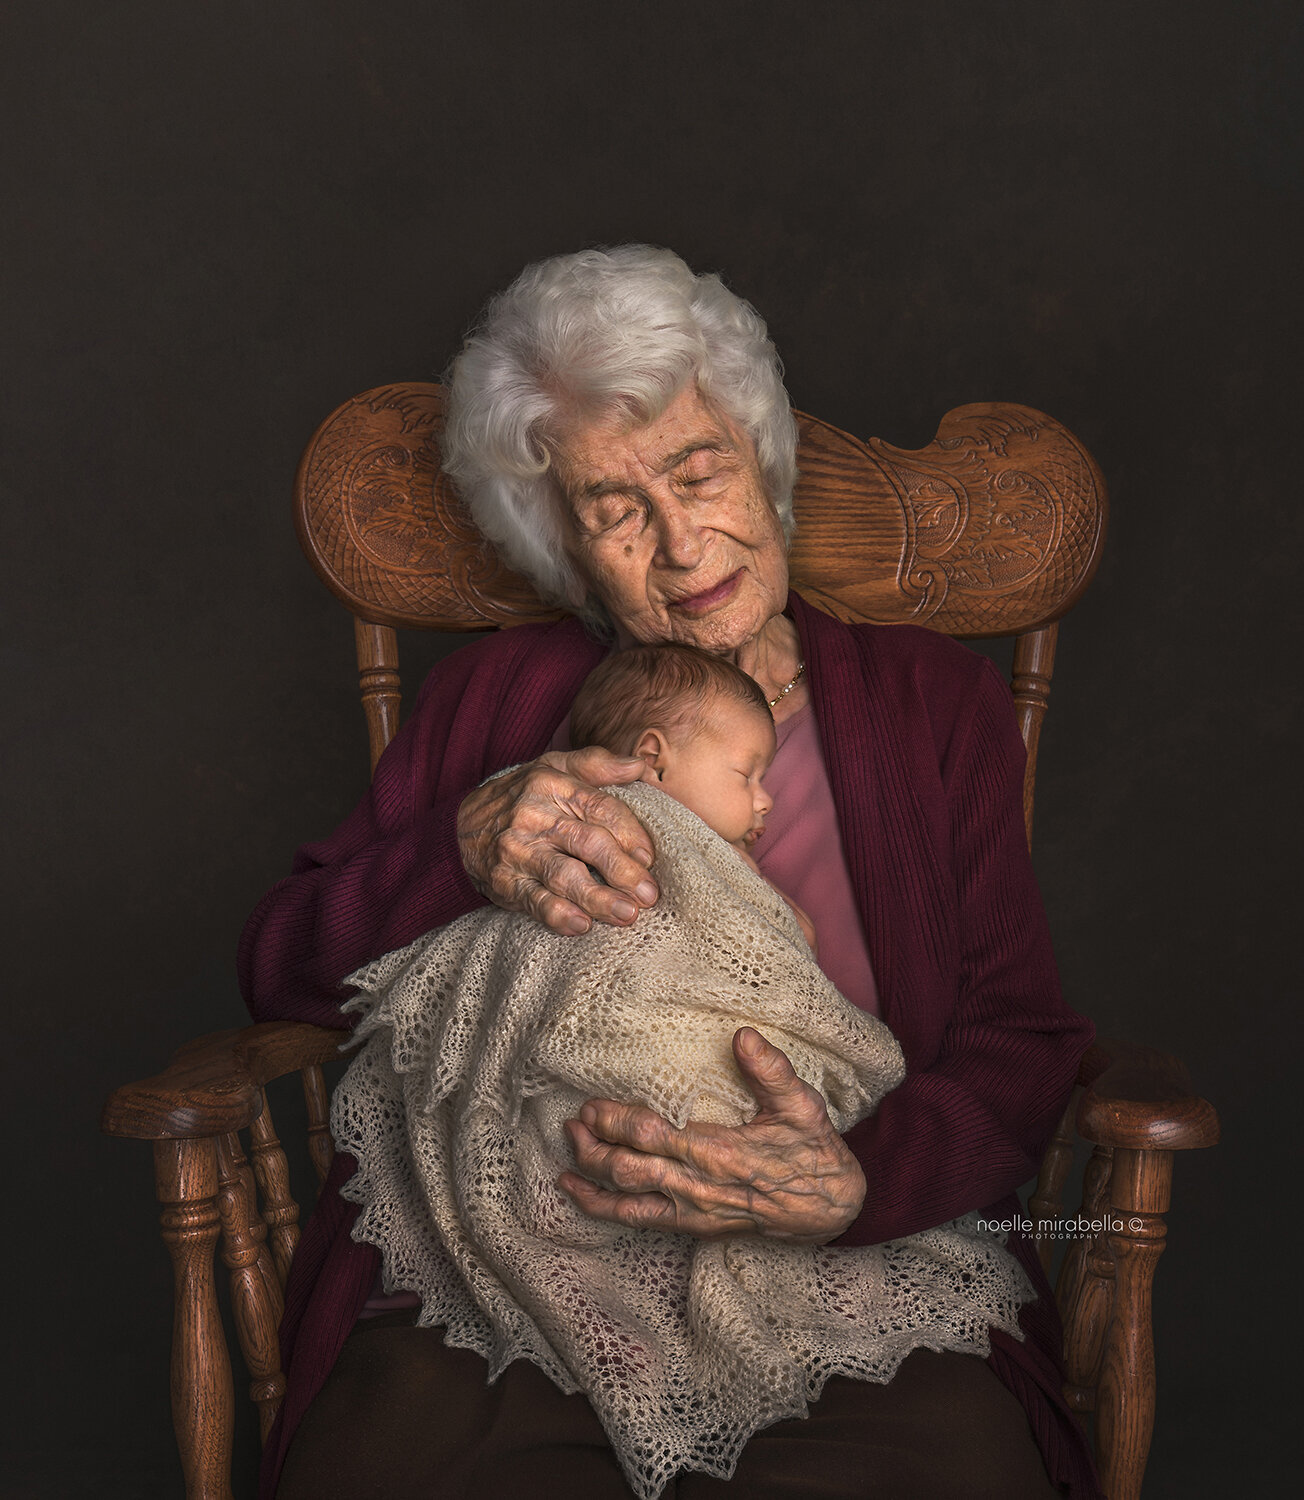 100 year old woman sitting in a rocking chair holding newborn baby.